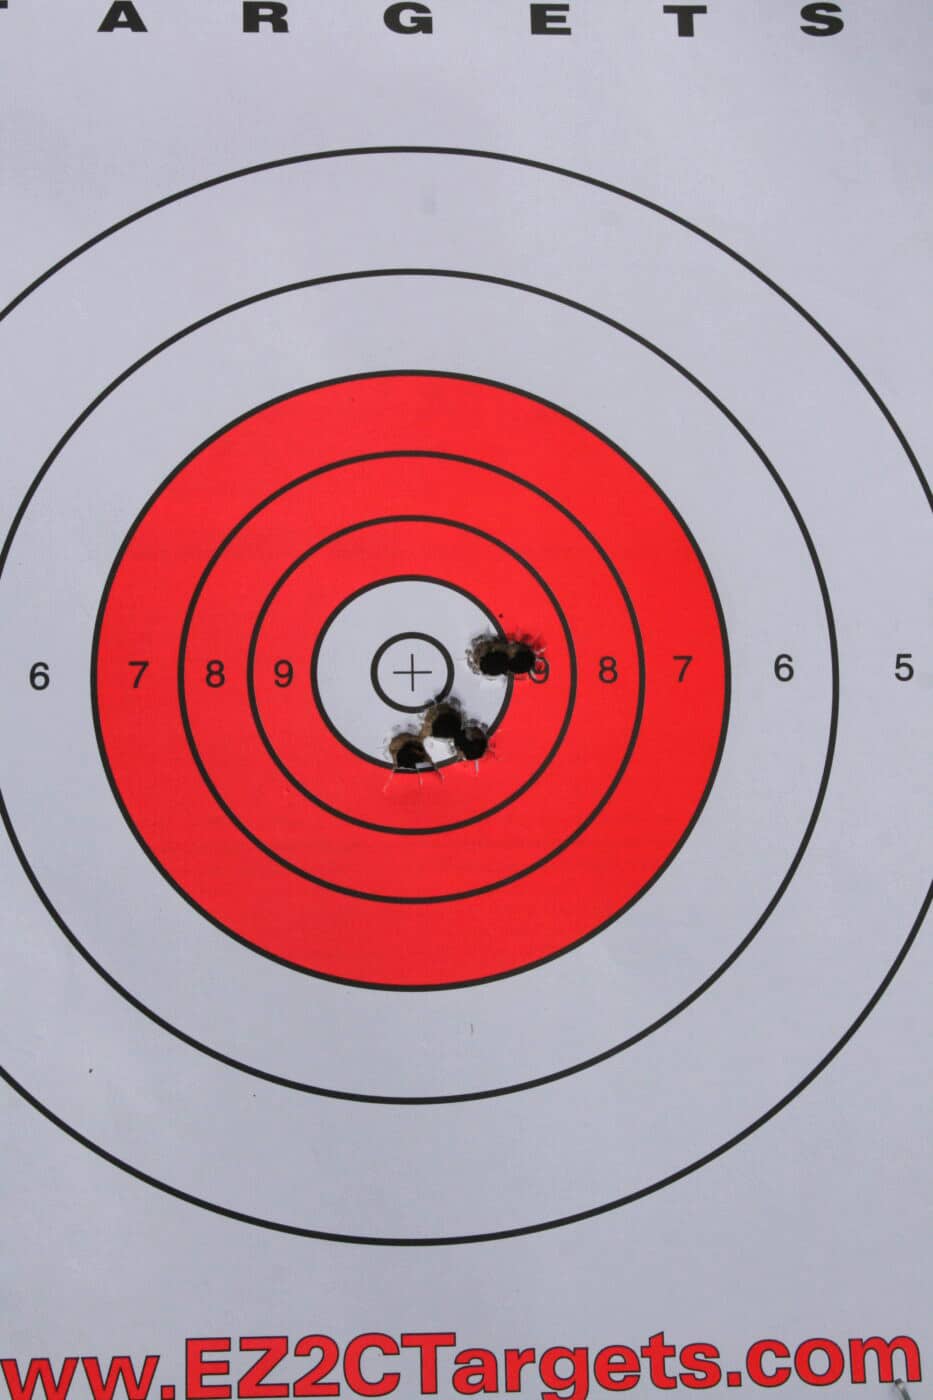 Tight group on shooting target